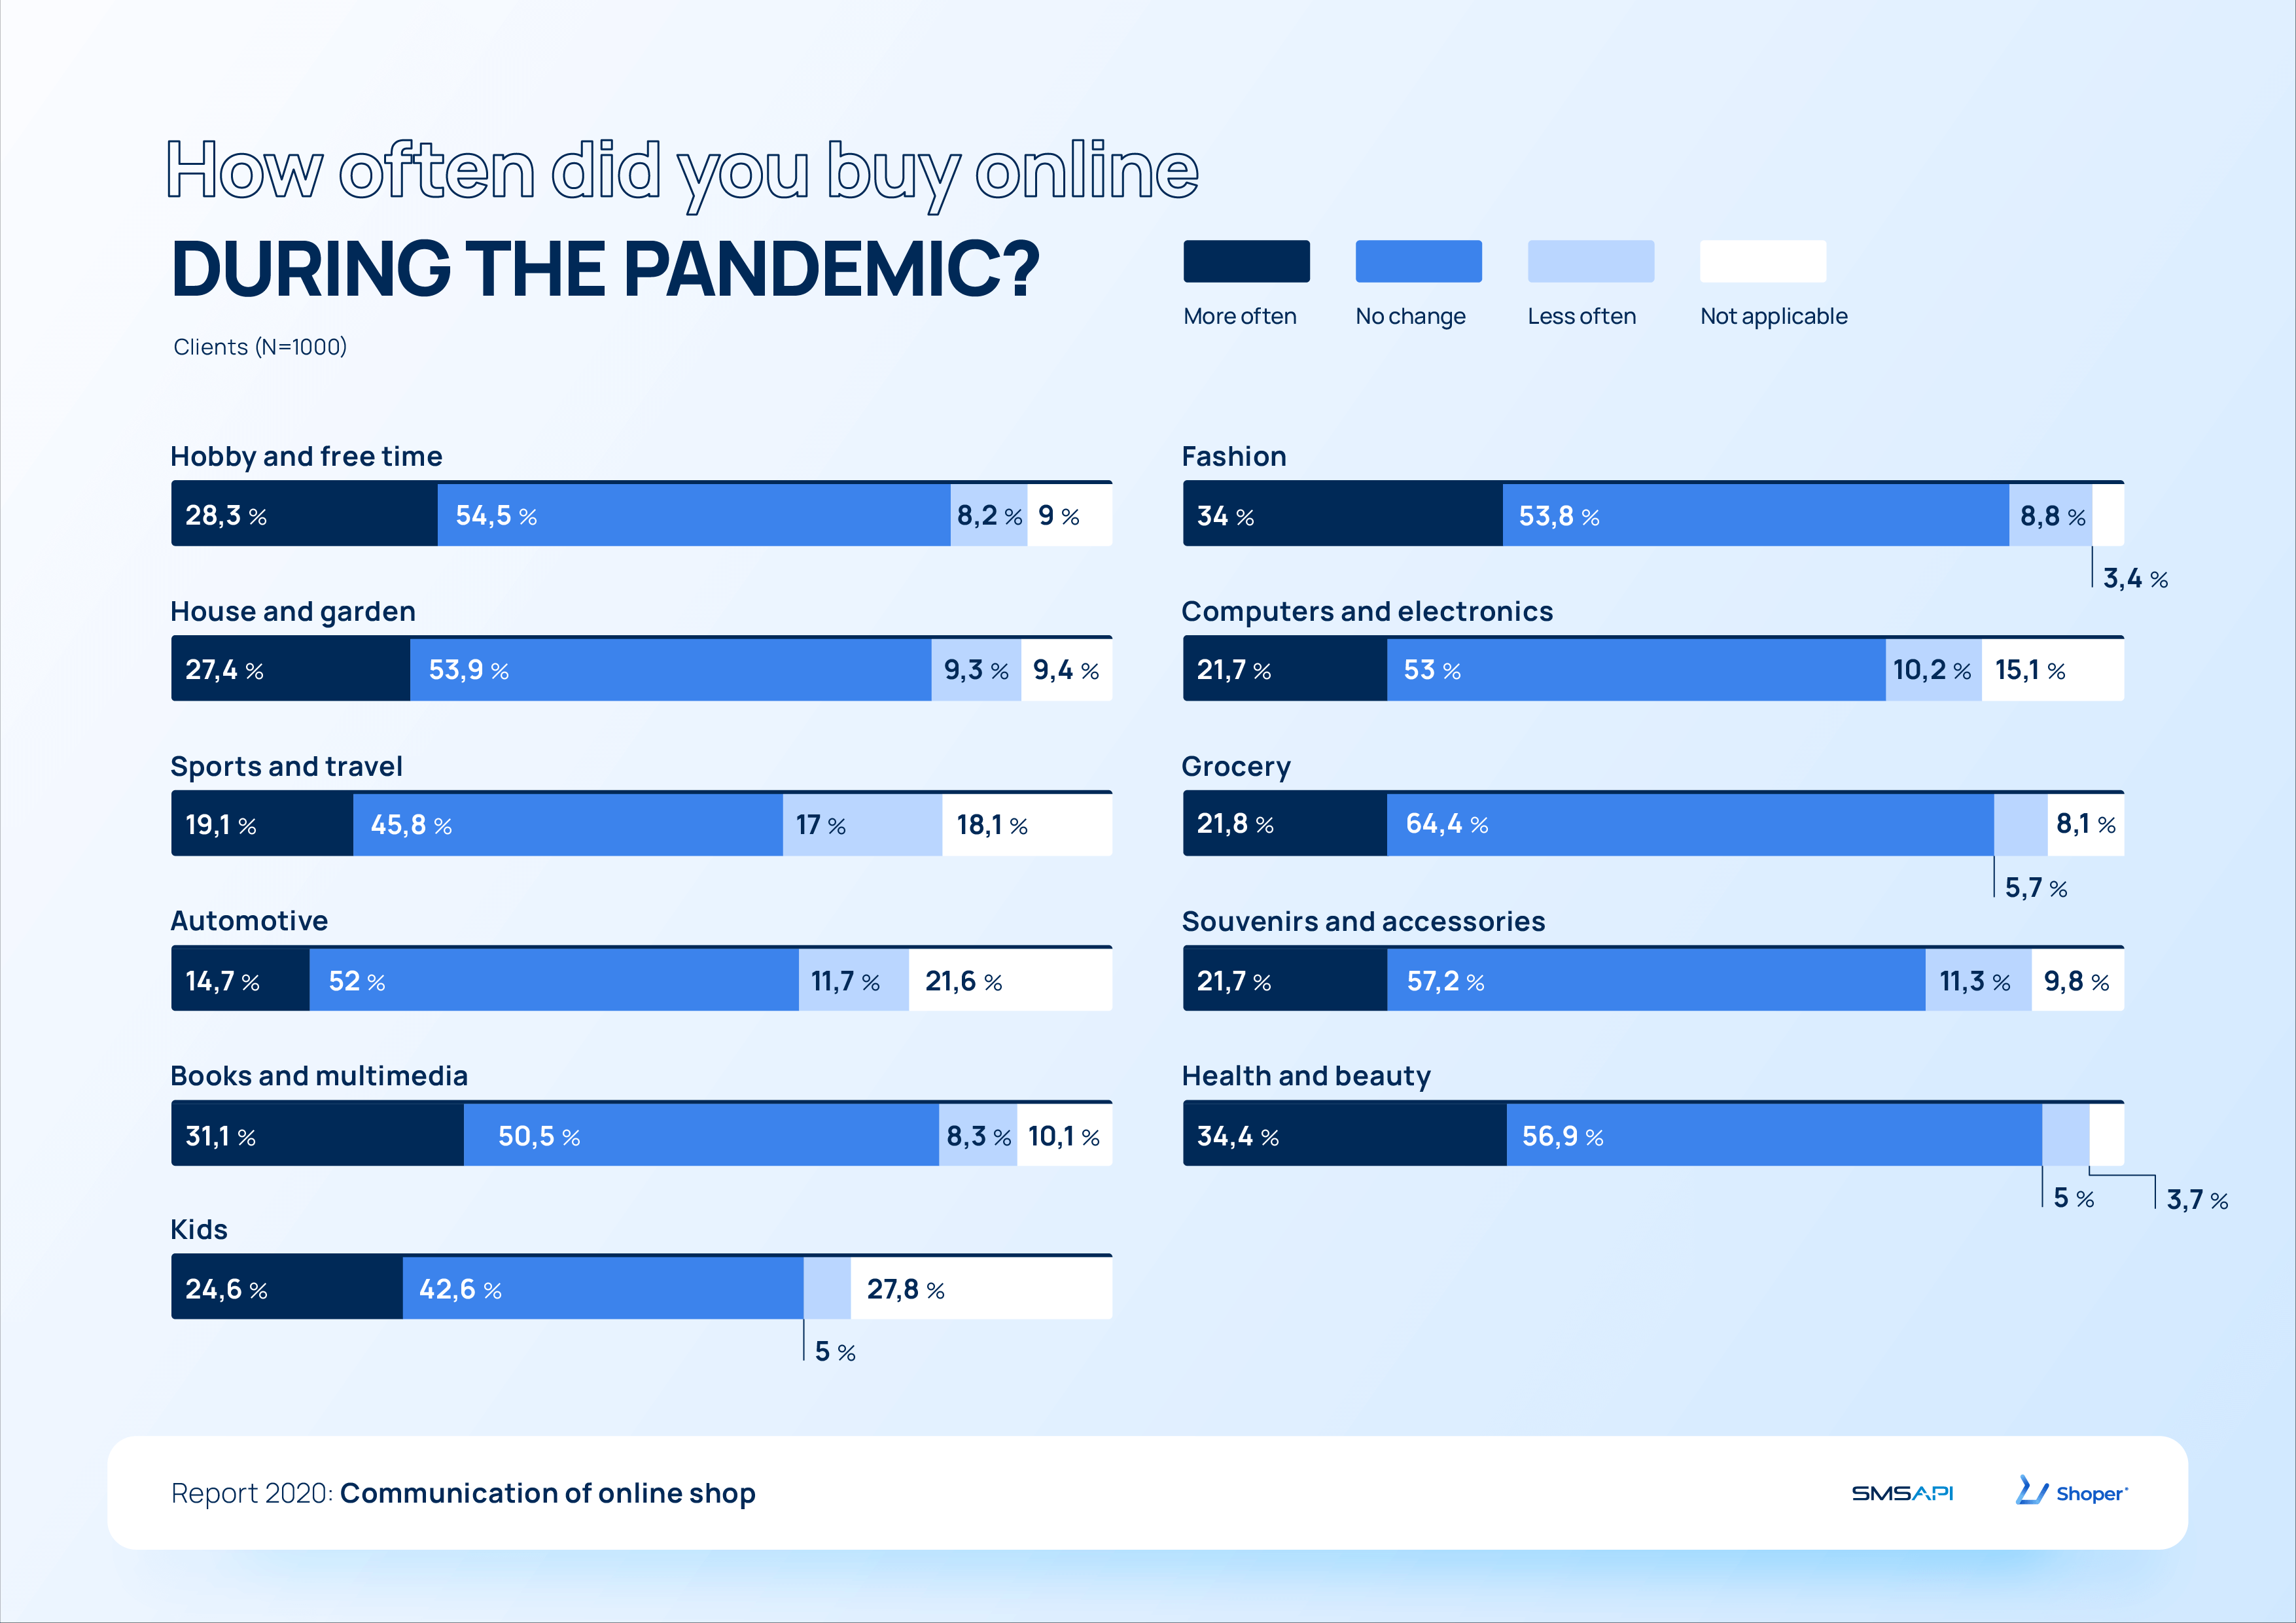 How often did you buy online during pandemic? 2020 e-commerce report